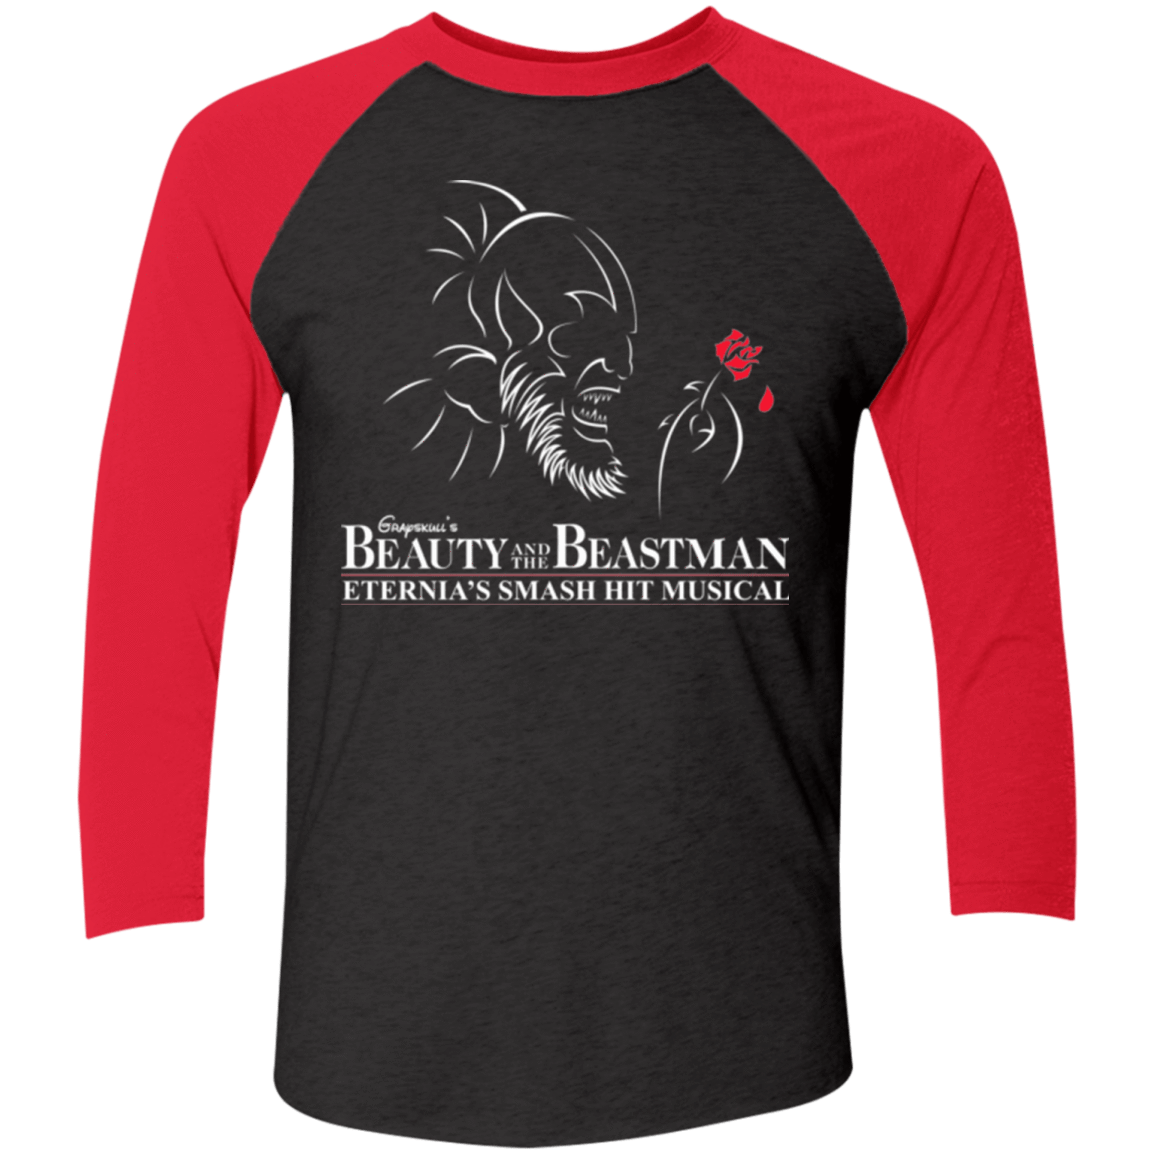 T-Shirts Vintage Black/Vintage Red / X-Small Beauty and the Beastman Men's Triblend 3/4 Sleeve